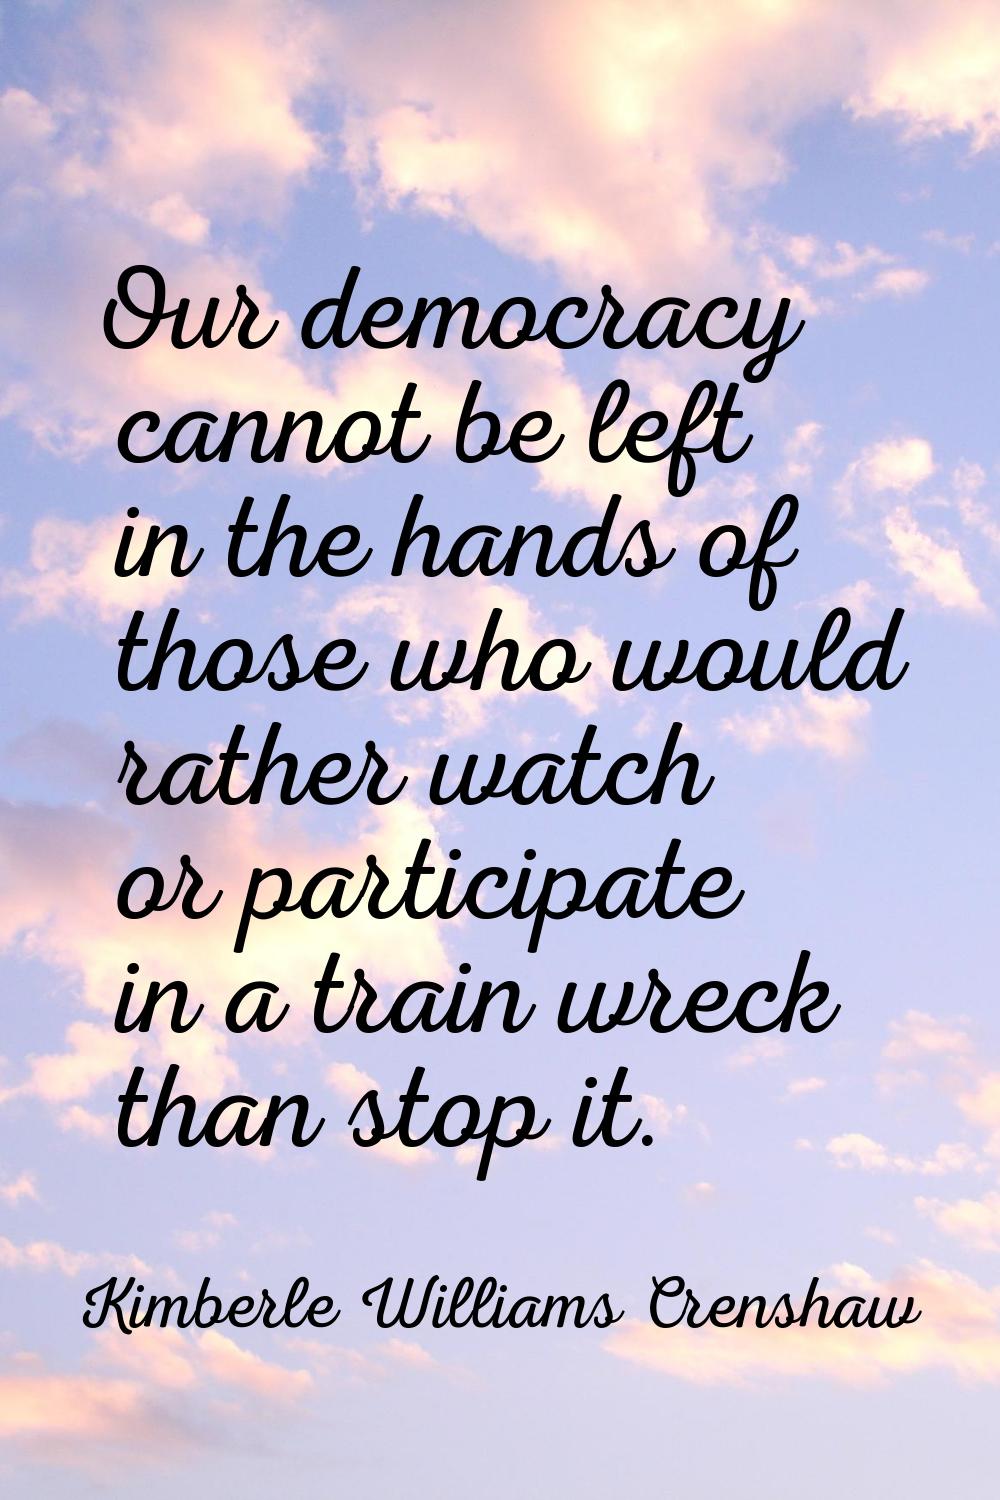 Our democracy cannot be left in the hands of those who would rather watch or participate in a train